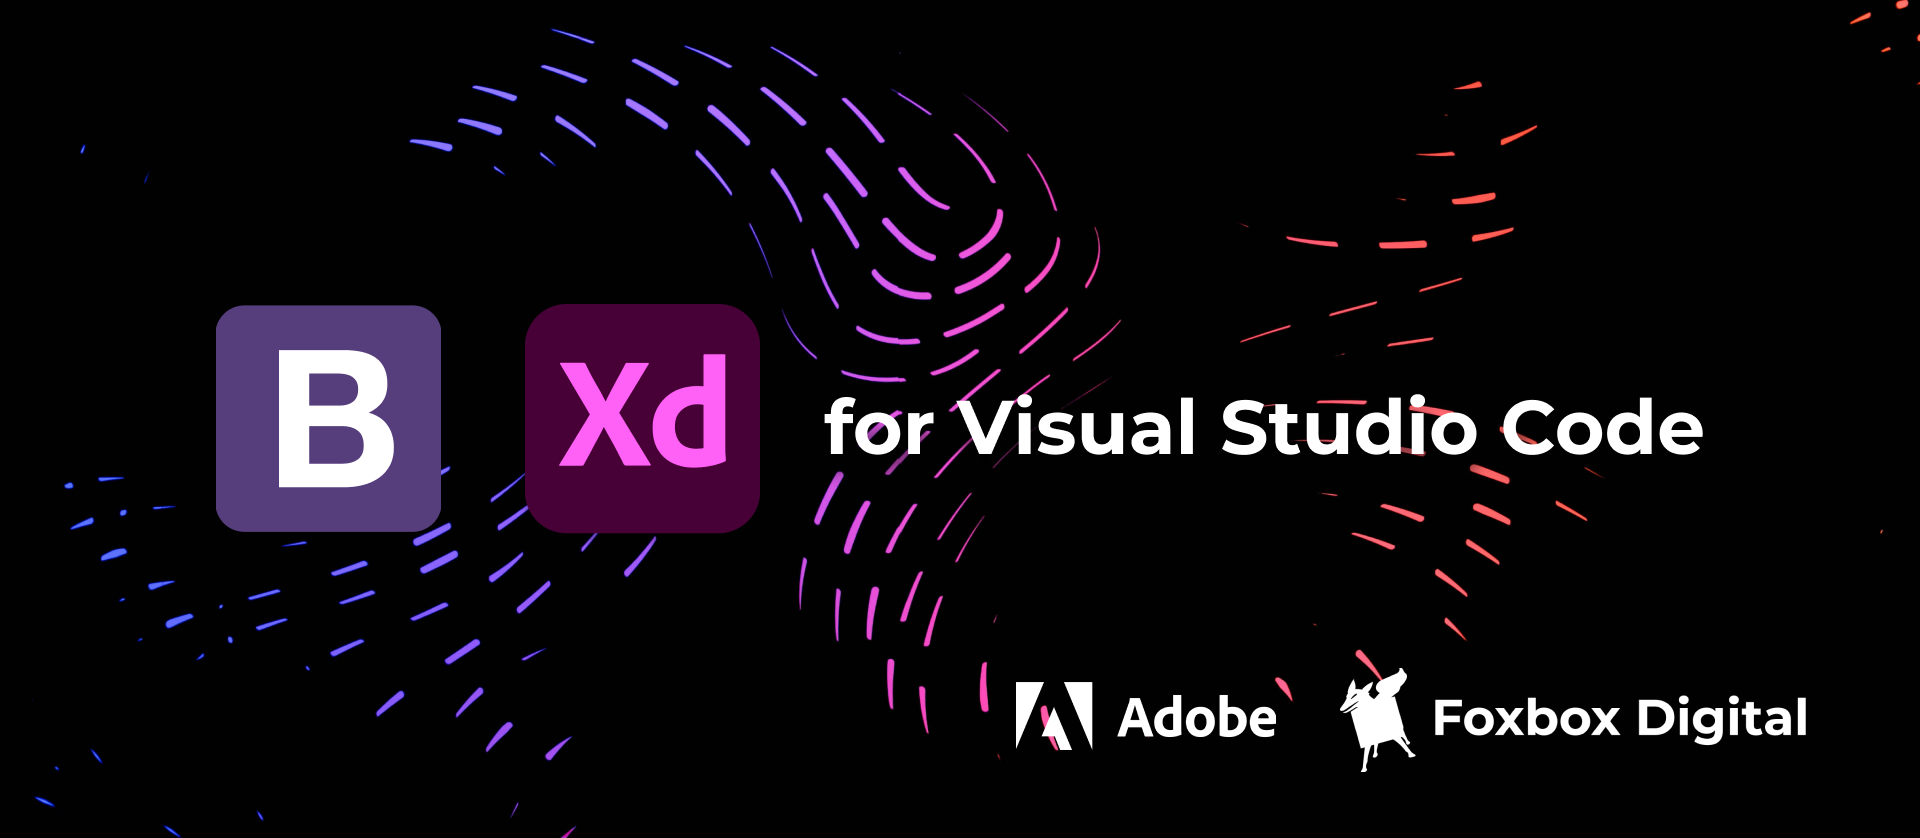 Bootstrap DSP for the Adobe XD Extension for VS Code, created by Foxbox Digital